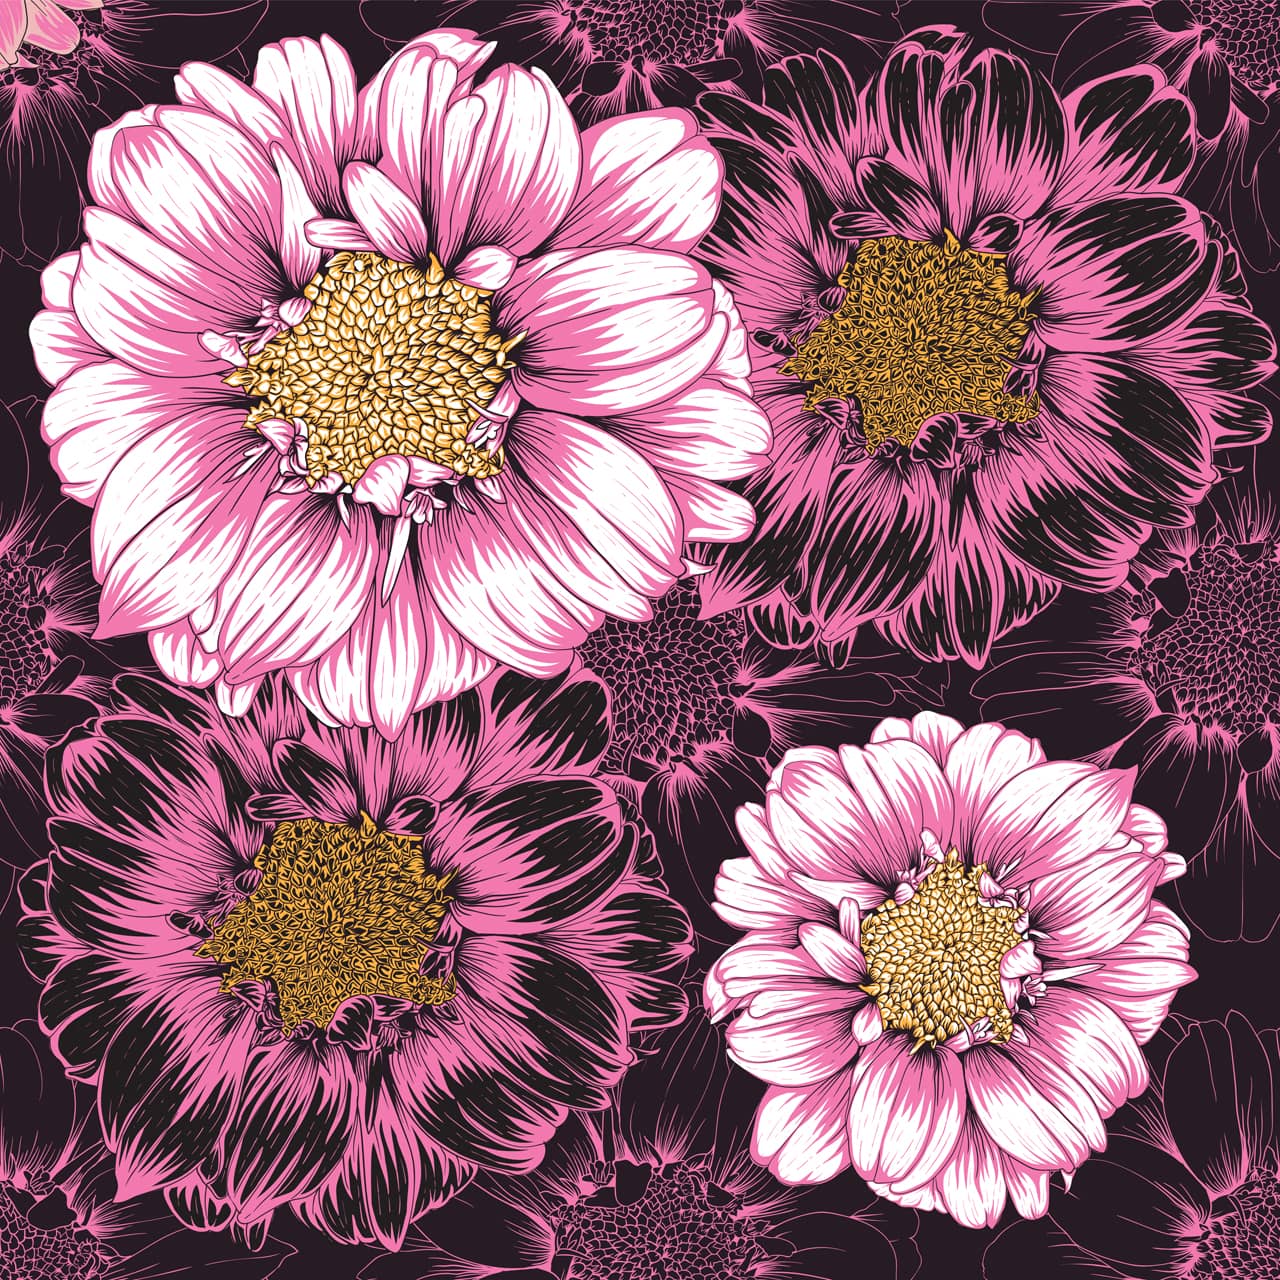 Seamless pattern vintage background with hand drawn floral zinnia flowers